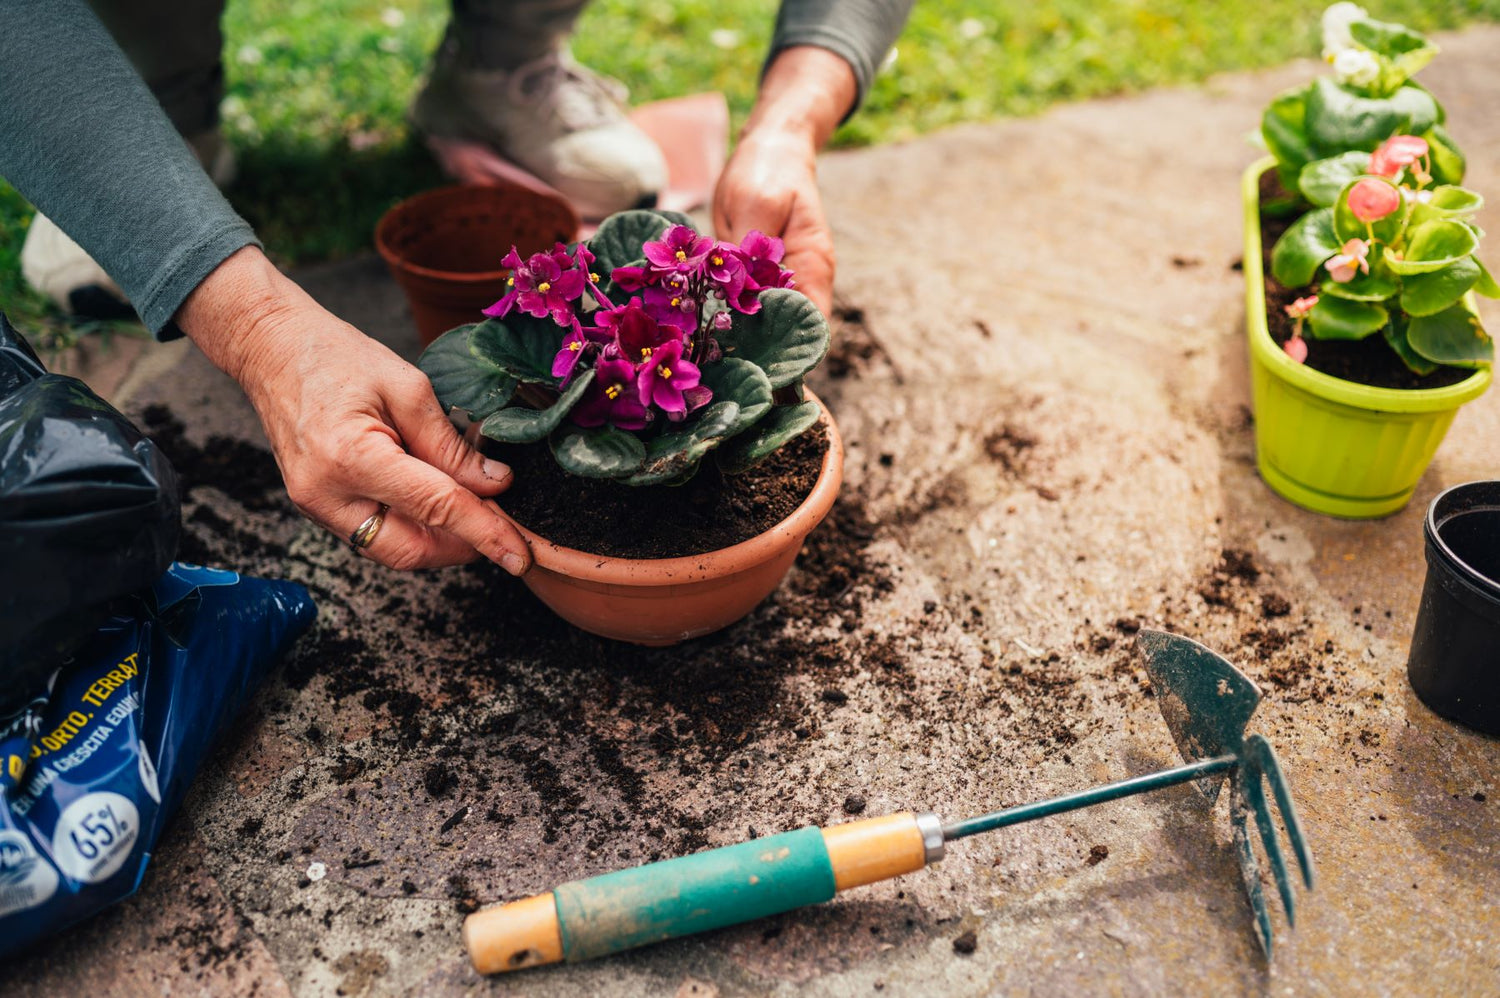 A pair of hands repotting a pink African violet plant outdoors on the pavement. The hands are wearing tennis shoes and holding a gardening tool, while the plant is in a nursery pot surrounded by soil. There is grass visible in the background, and the weather appears sunny.